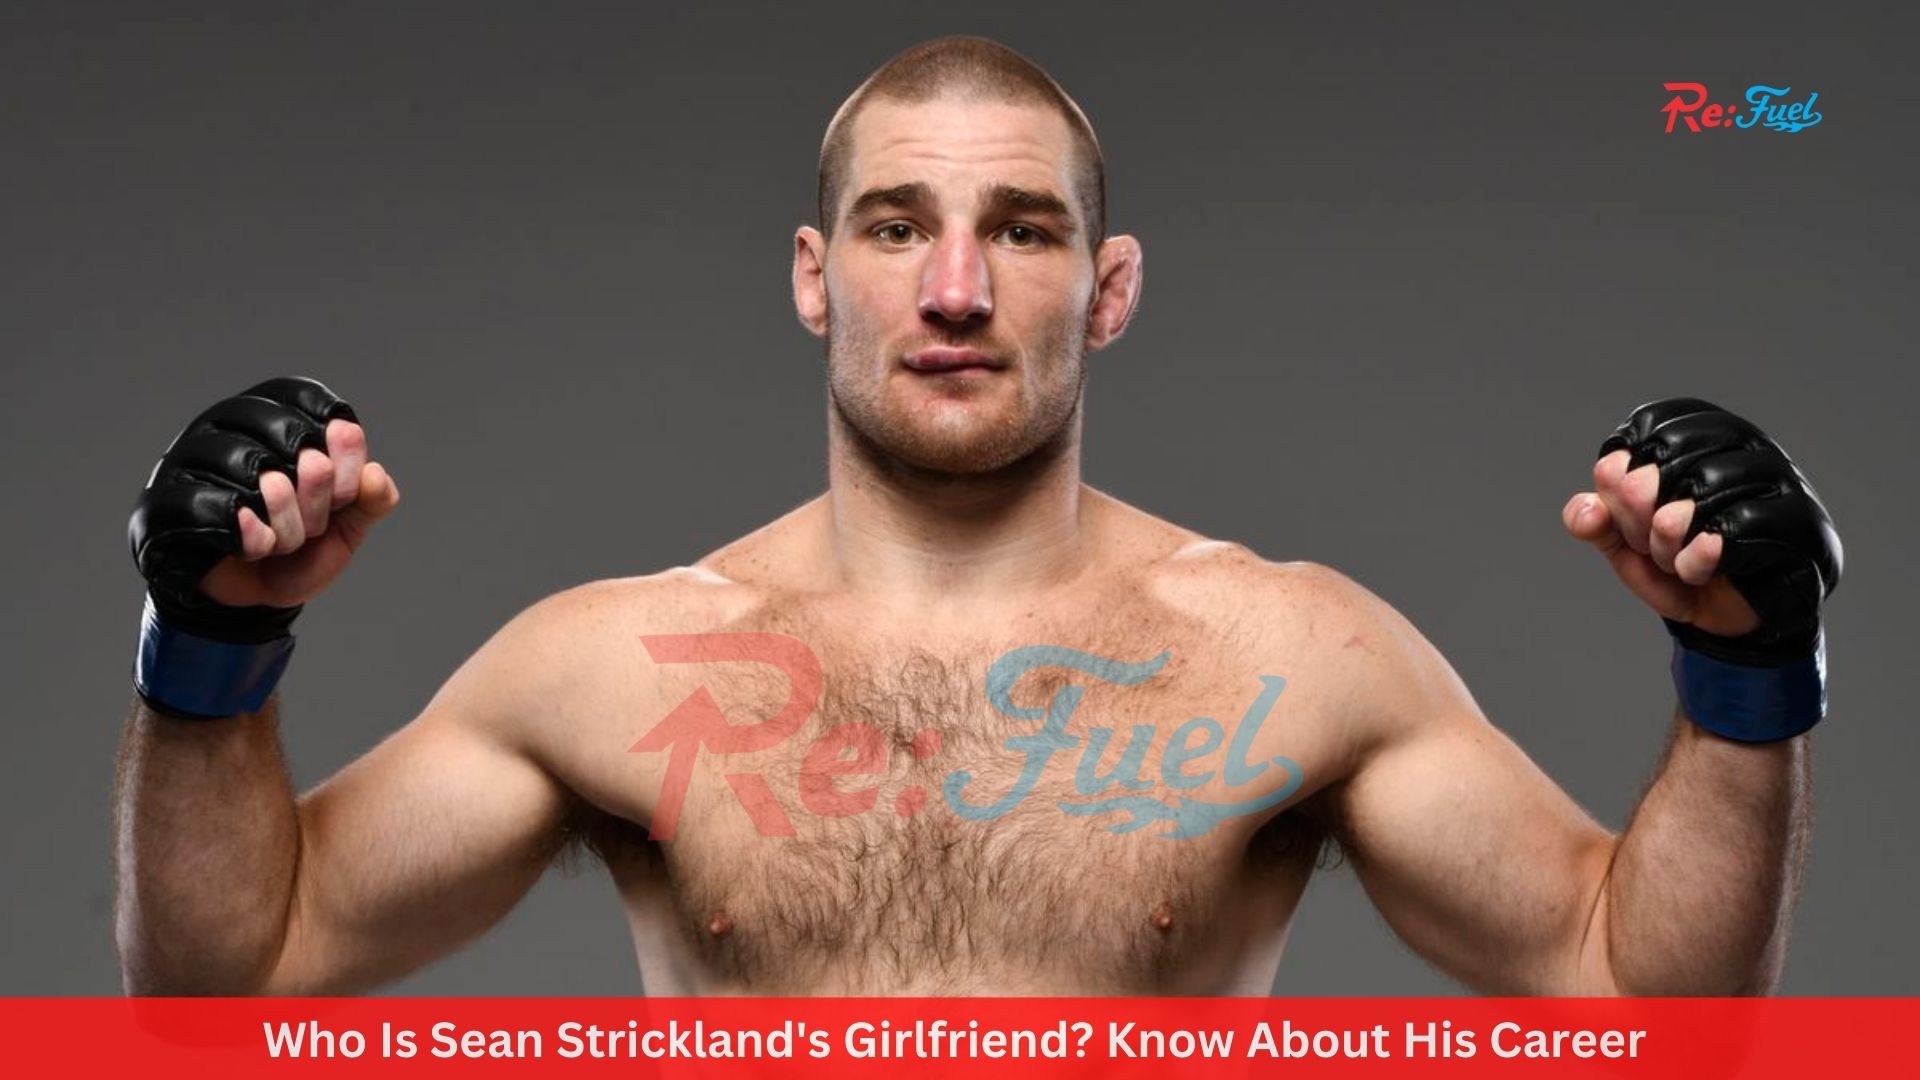 Who Is Sean Strickland's Girlfriend? Know About His Career